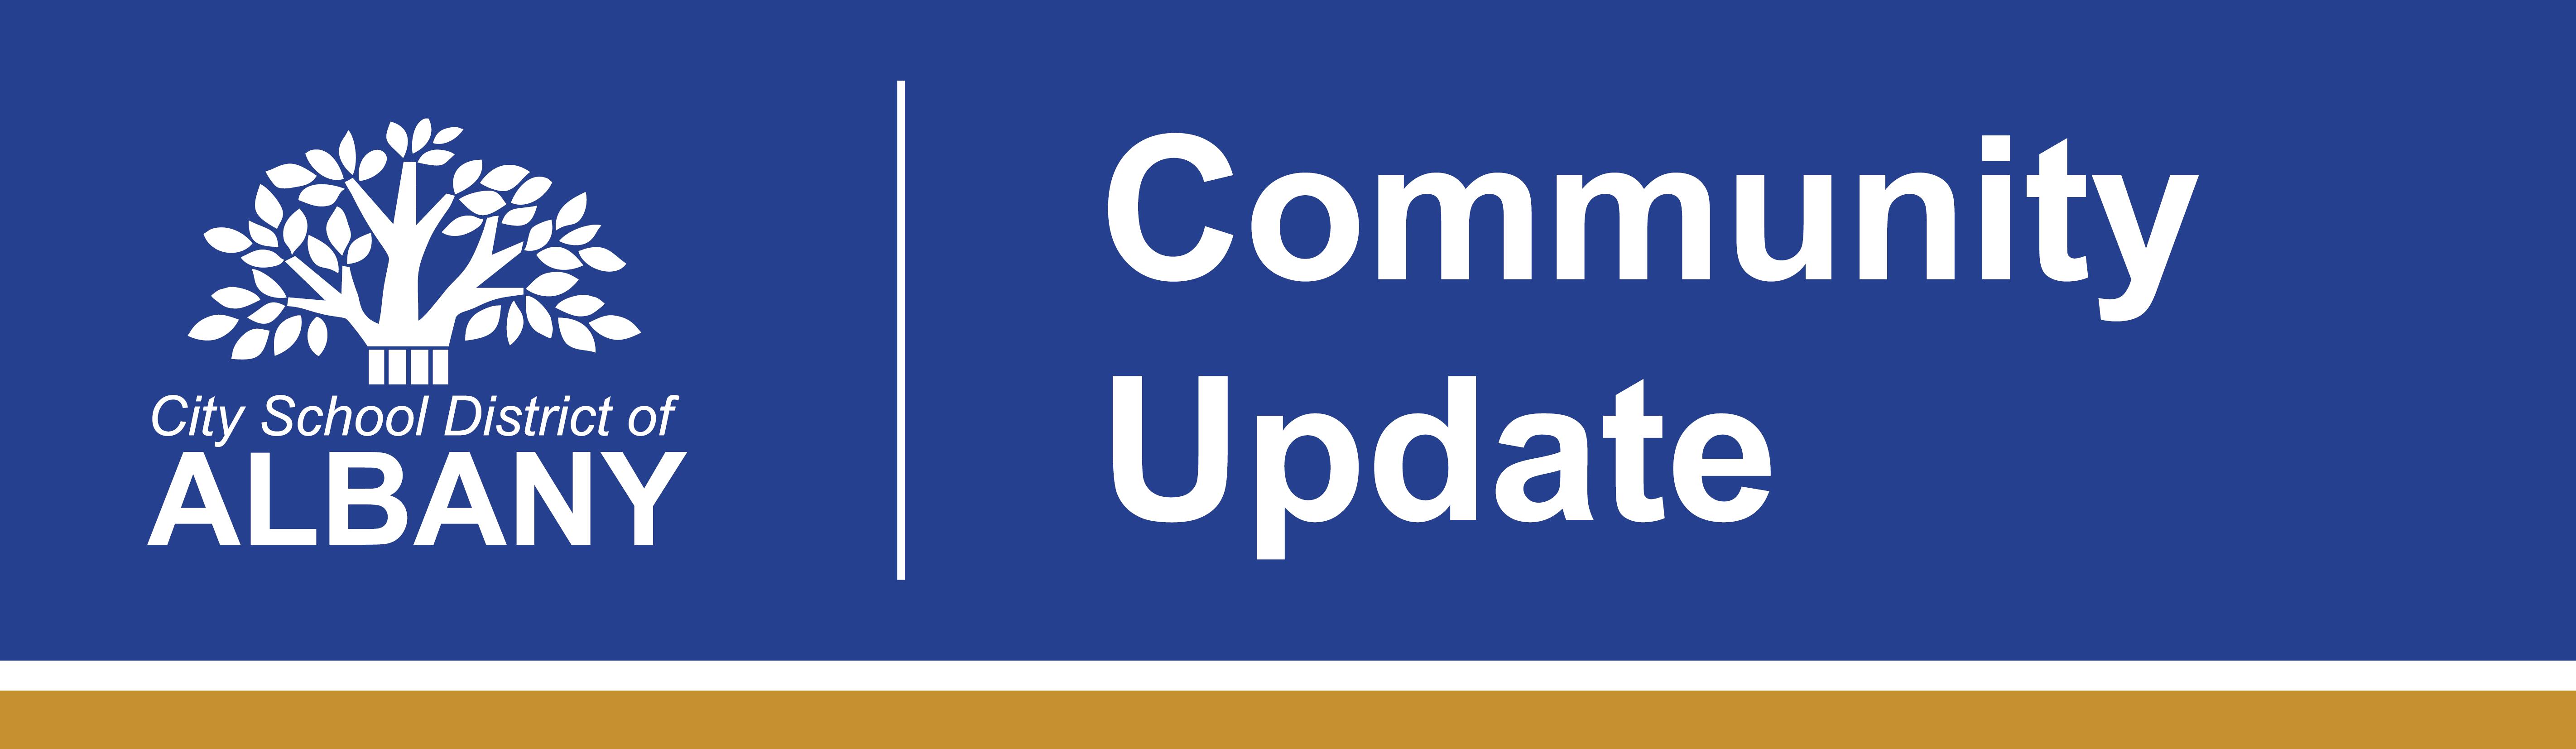 Masthead with the district logo and white text against a blue background that reads "community update"